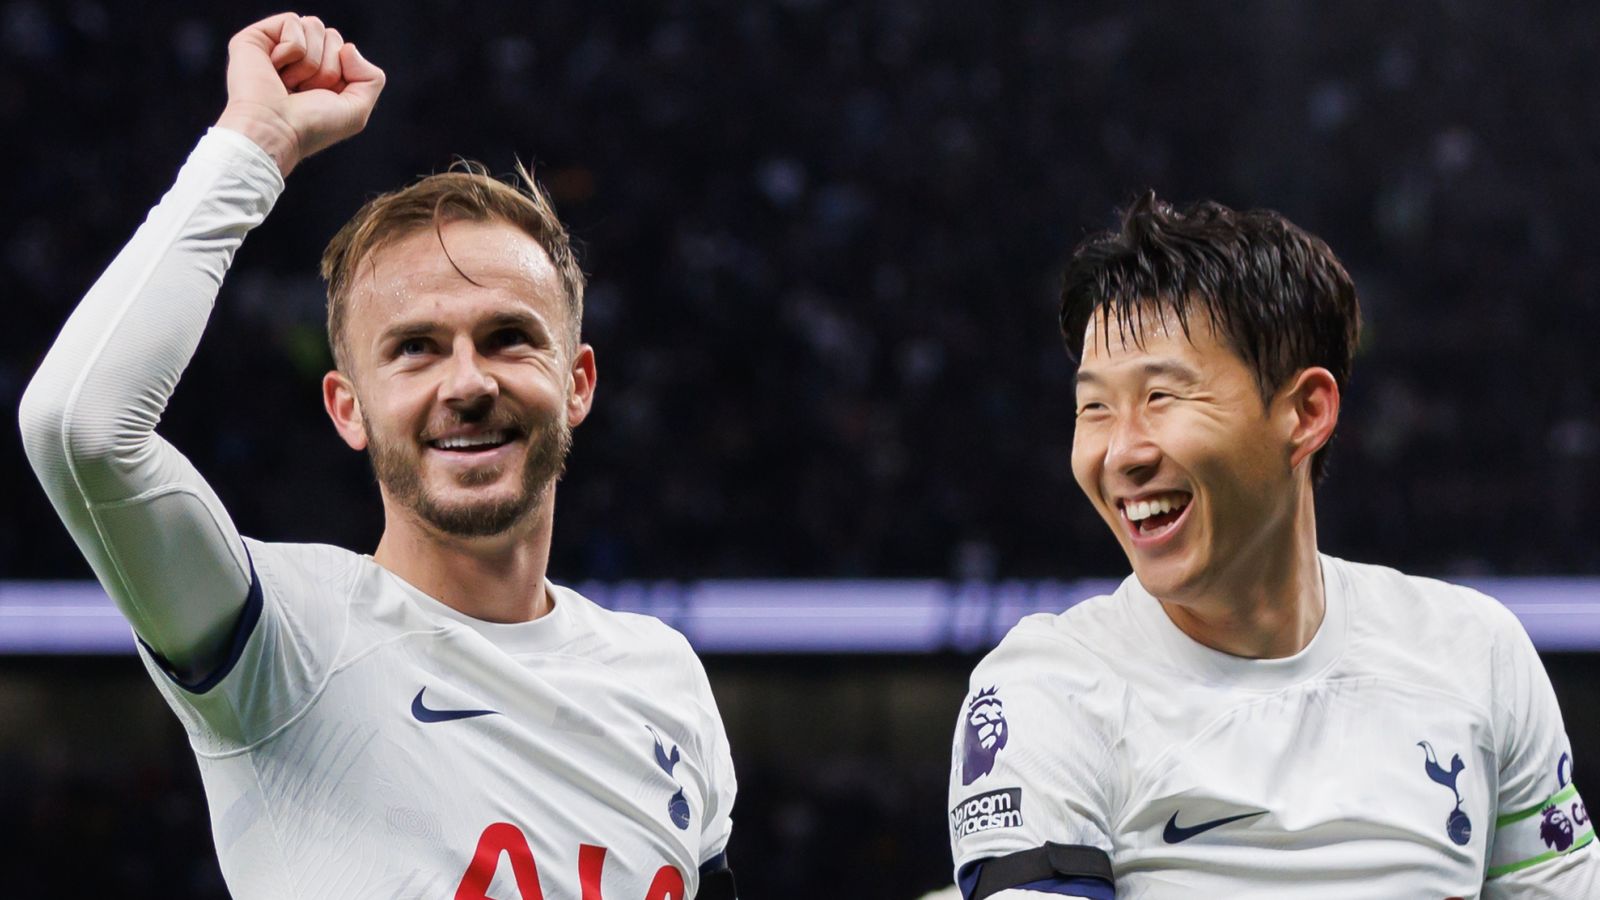 Son Heung-min strikes as Tottenham hold off Crystal Palace to stretch lead, Premier League